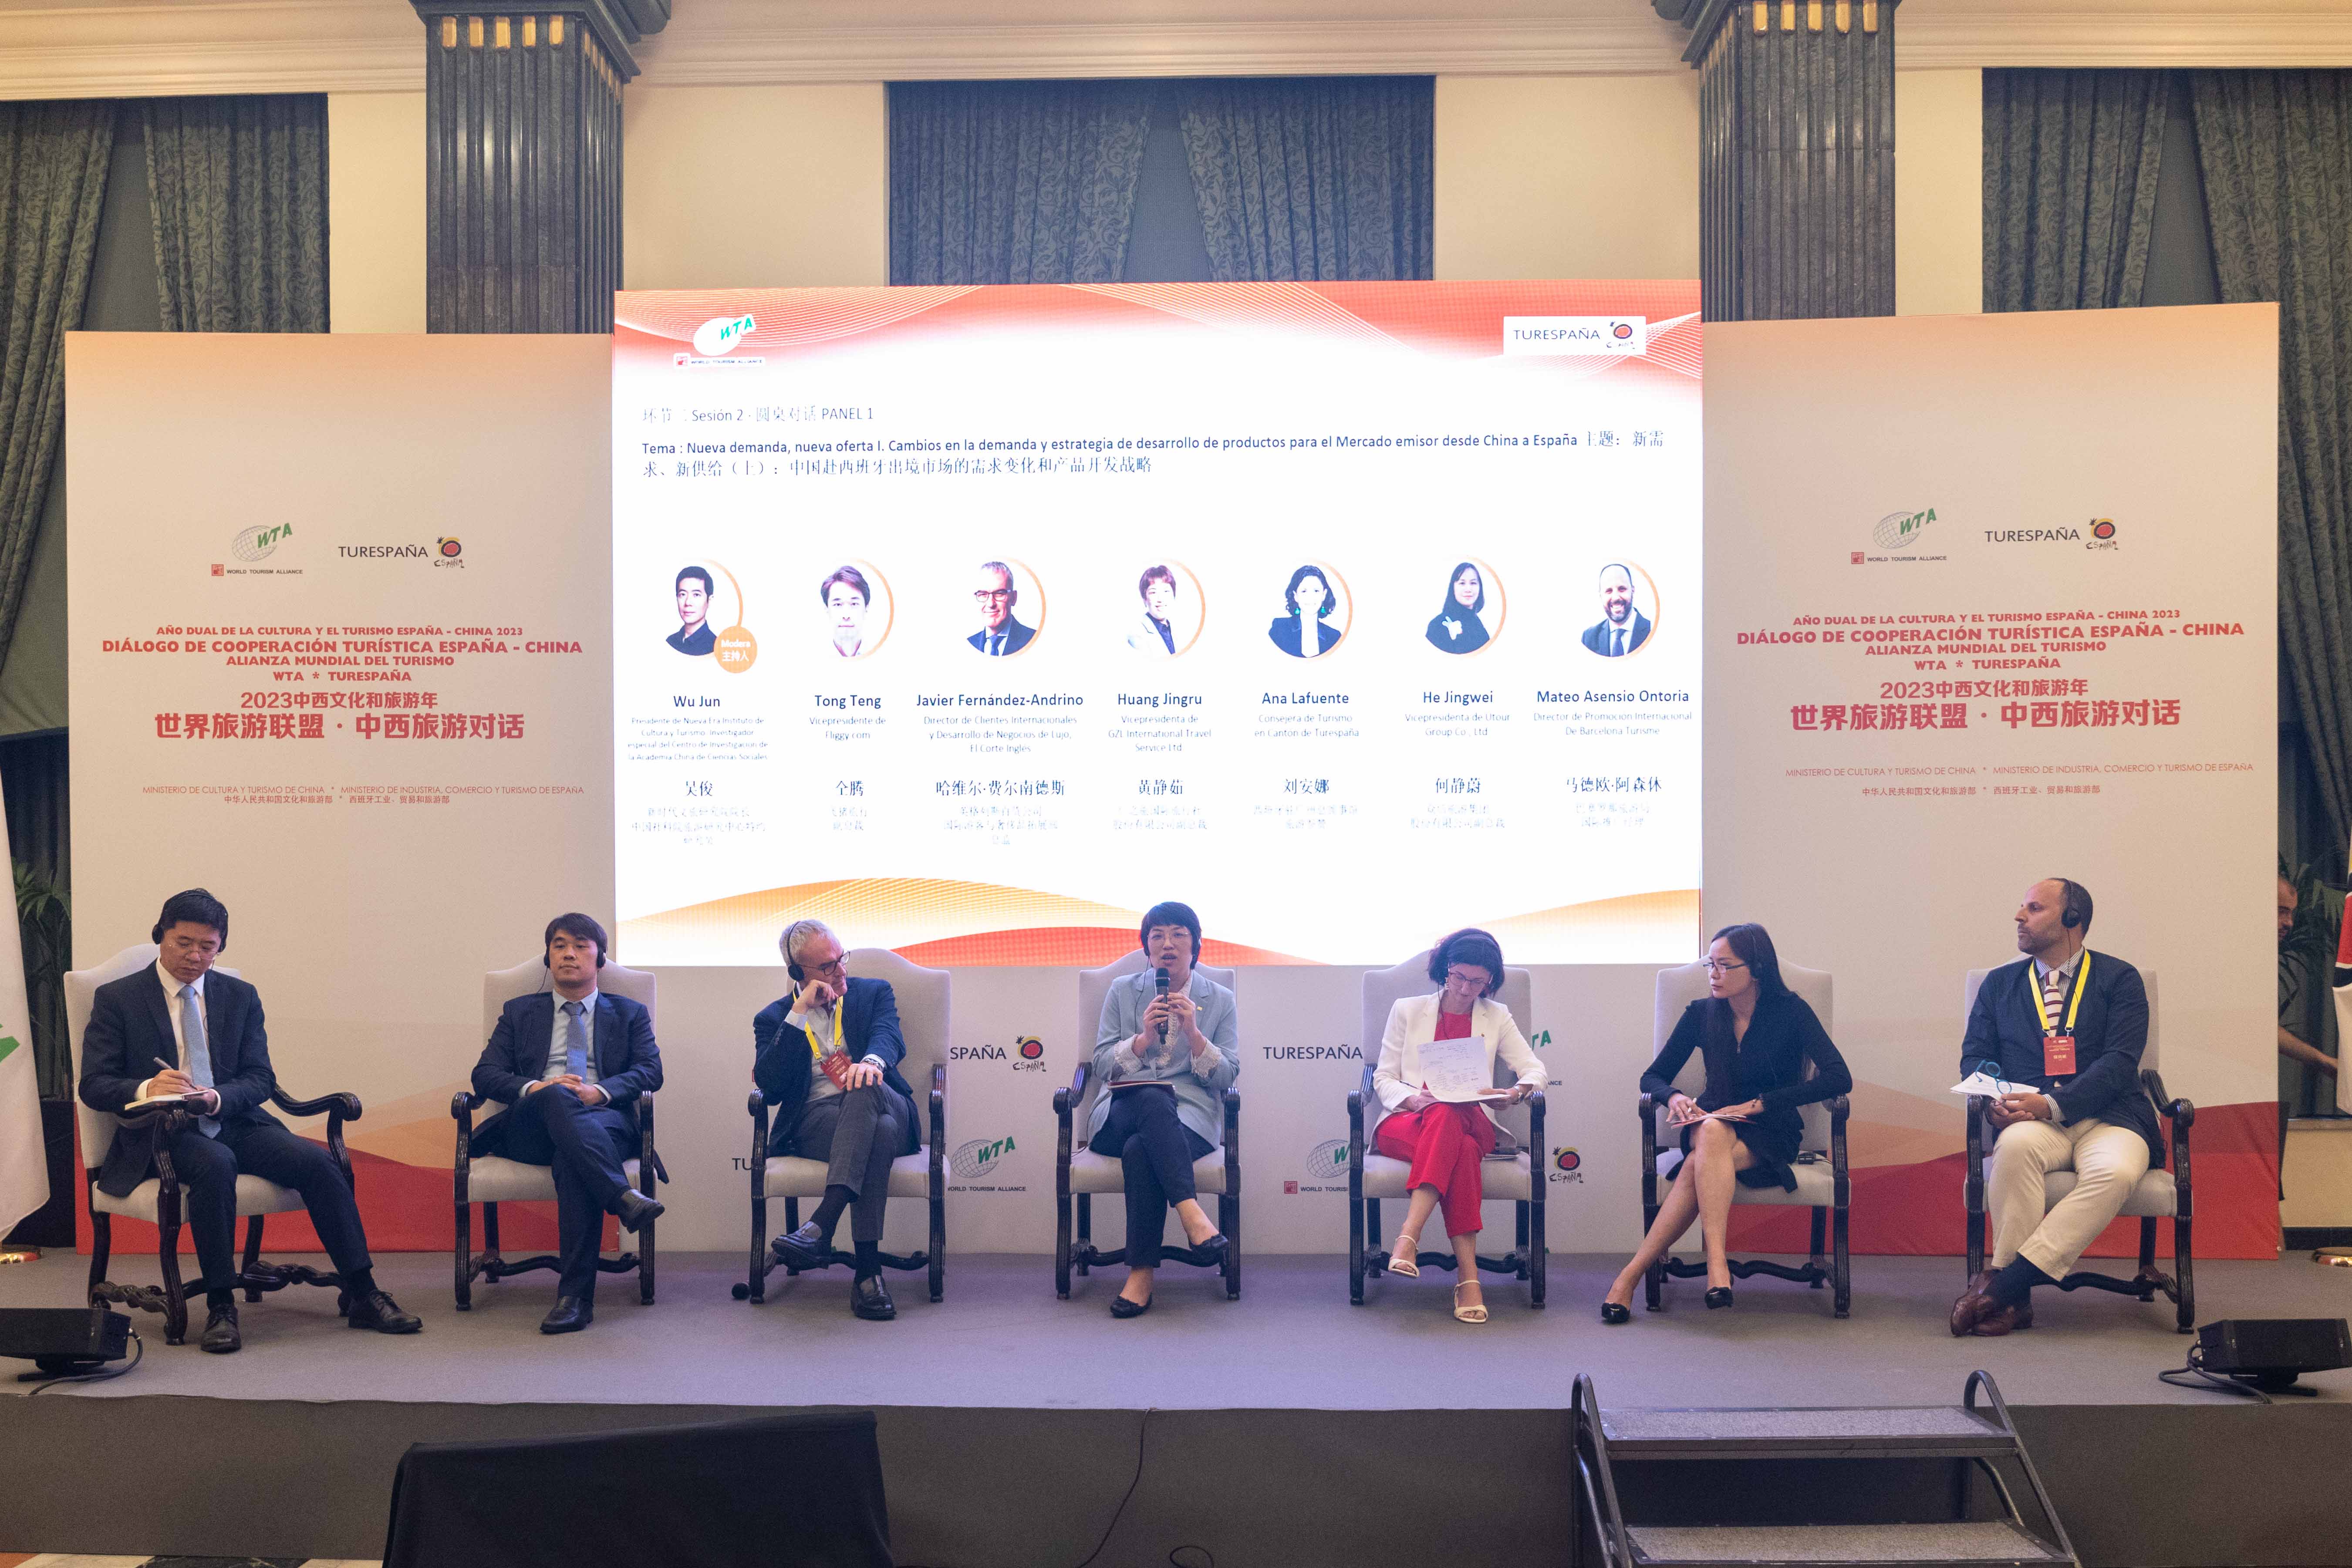 Panel Discussion- New Demand, New Supply (H1)：Changes in demand and product development strategy for the outbound market from China to Spain